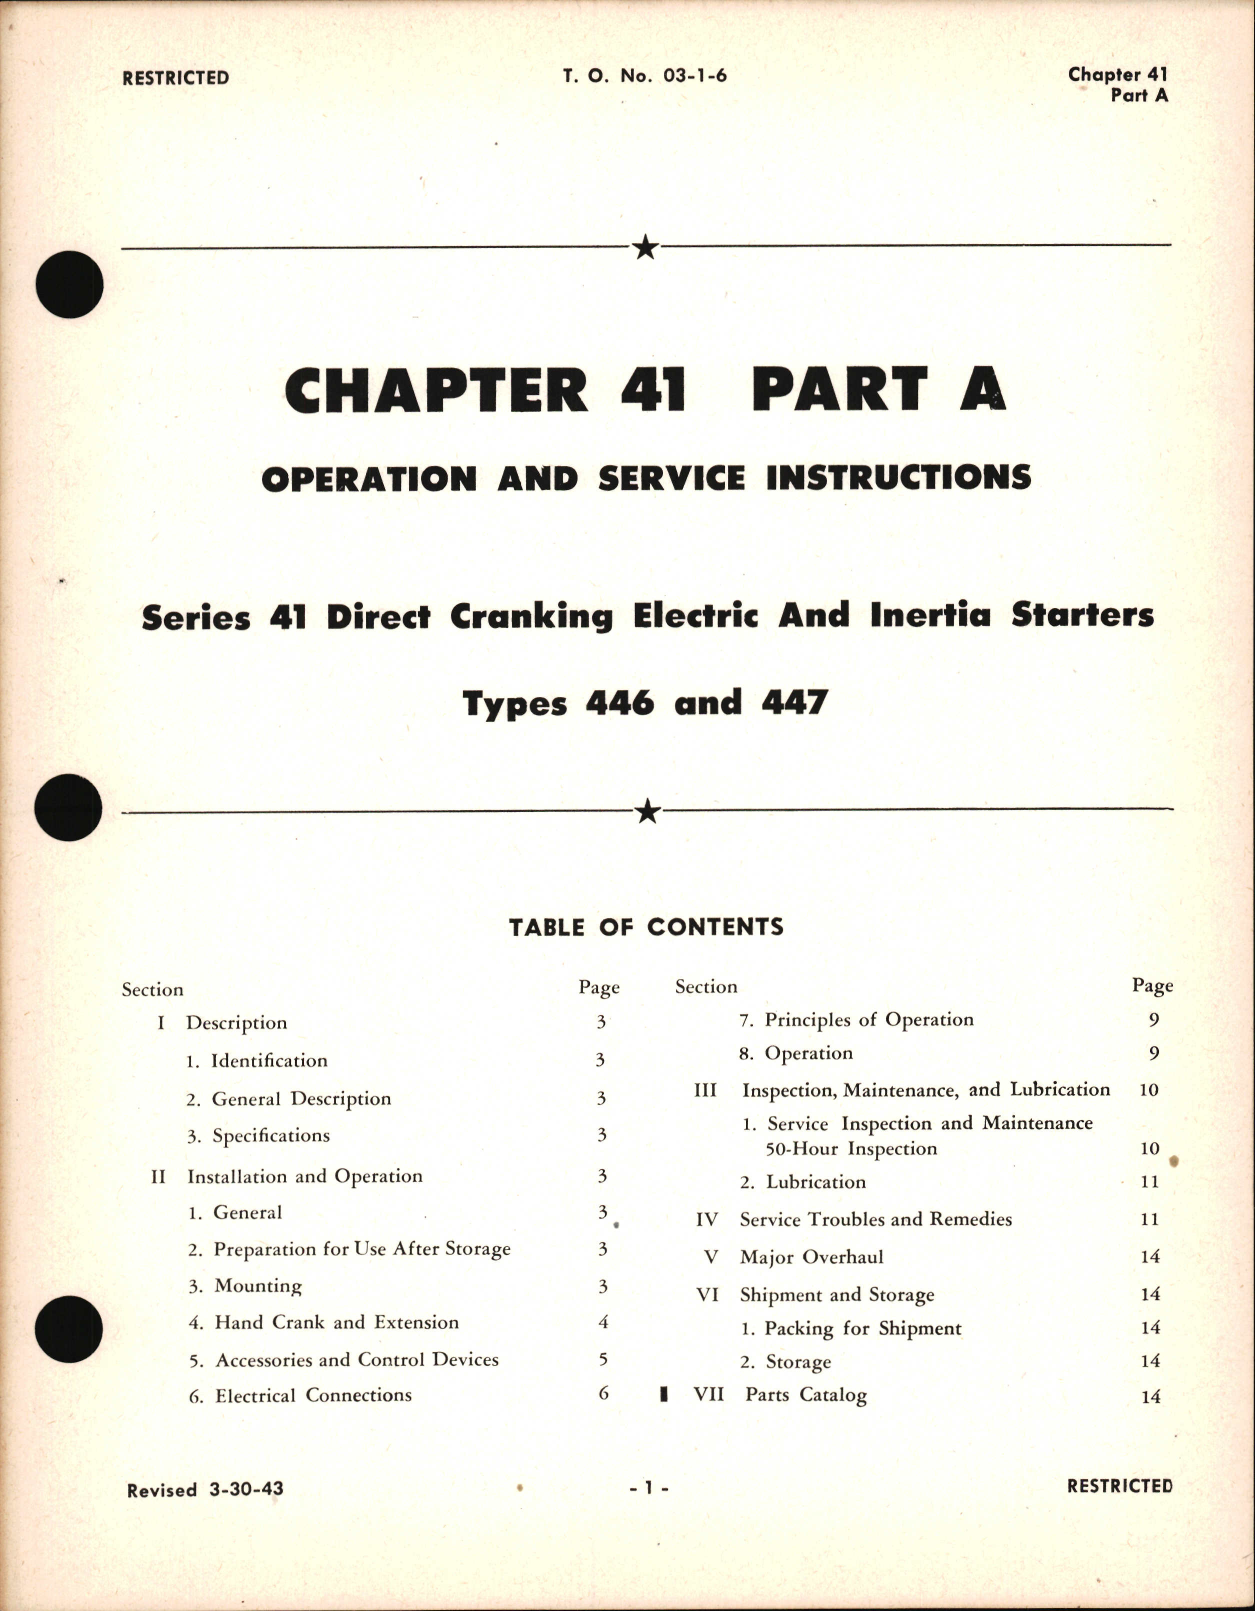 Sample page 1 from AirCorps Library document: Operation and Service Instructions for Direct Cranking Electric and Inertia Starters, Chapter 41 Part A